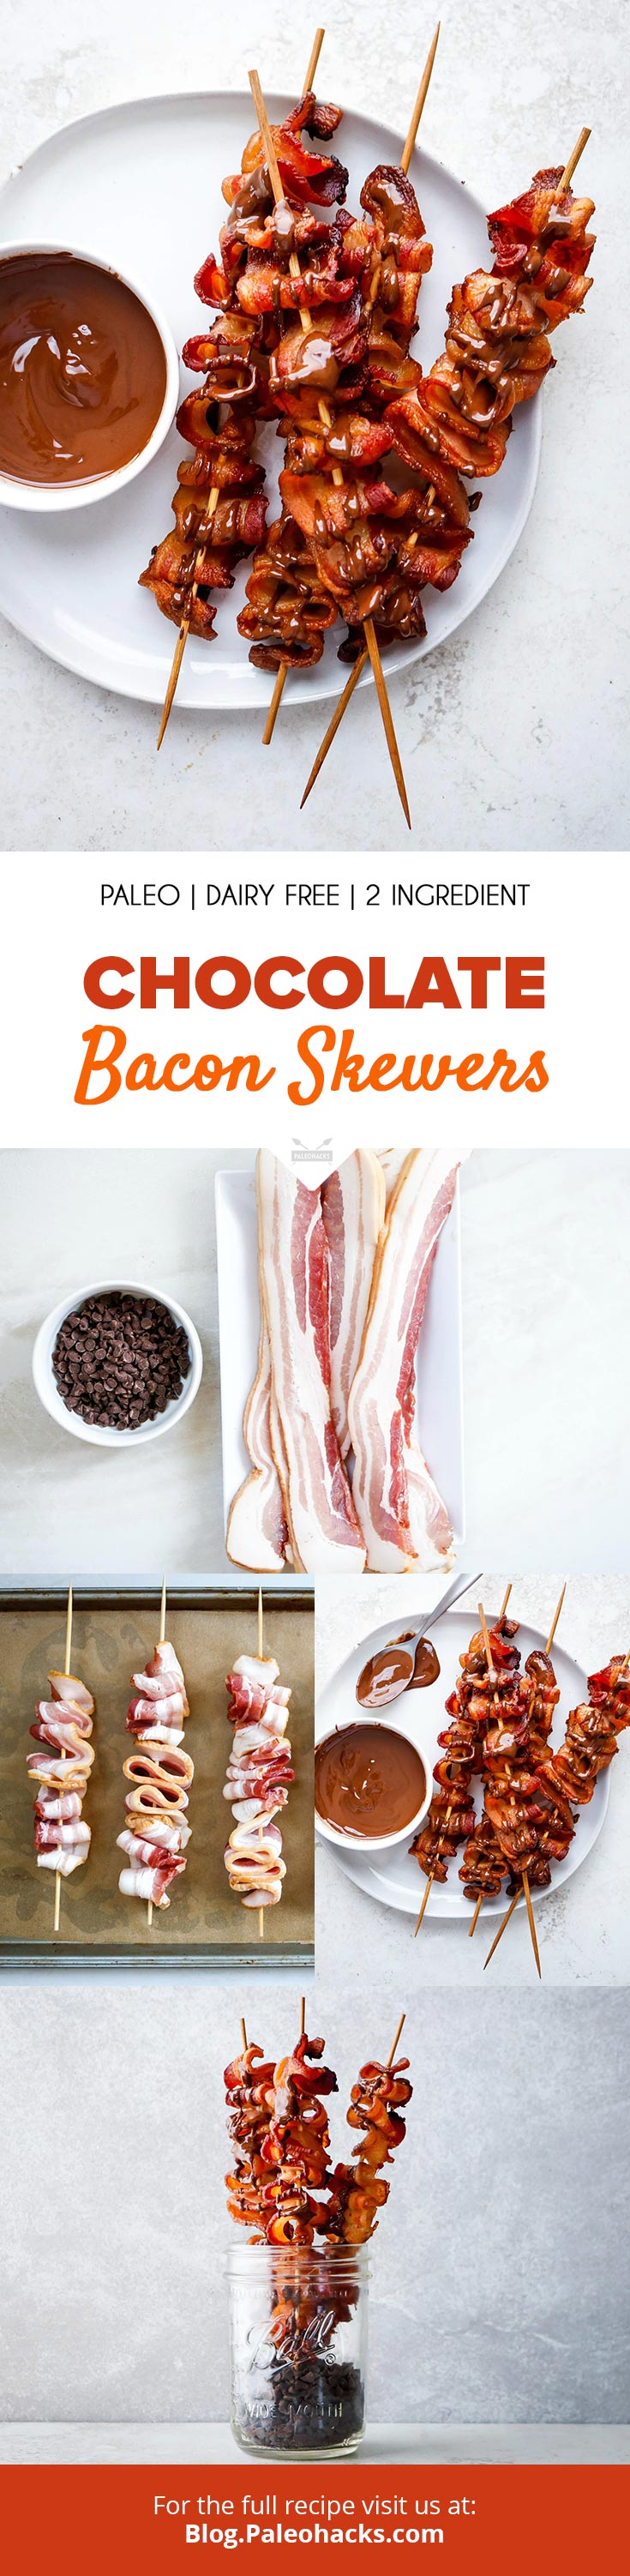 Bake up these sweet and savory Chocolate Bacon Skewers for a mouthwatering snack, rich in antioxidants. They're crunchy, sweet, and oh-so-delicious!